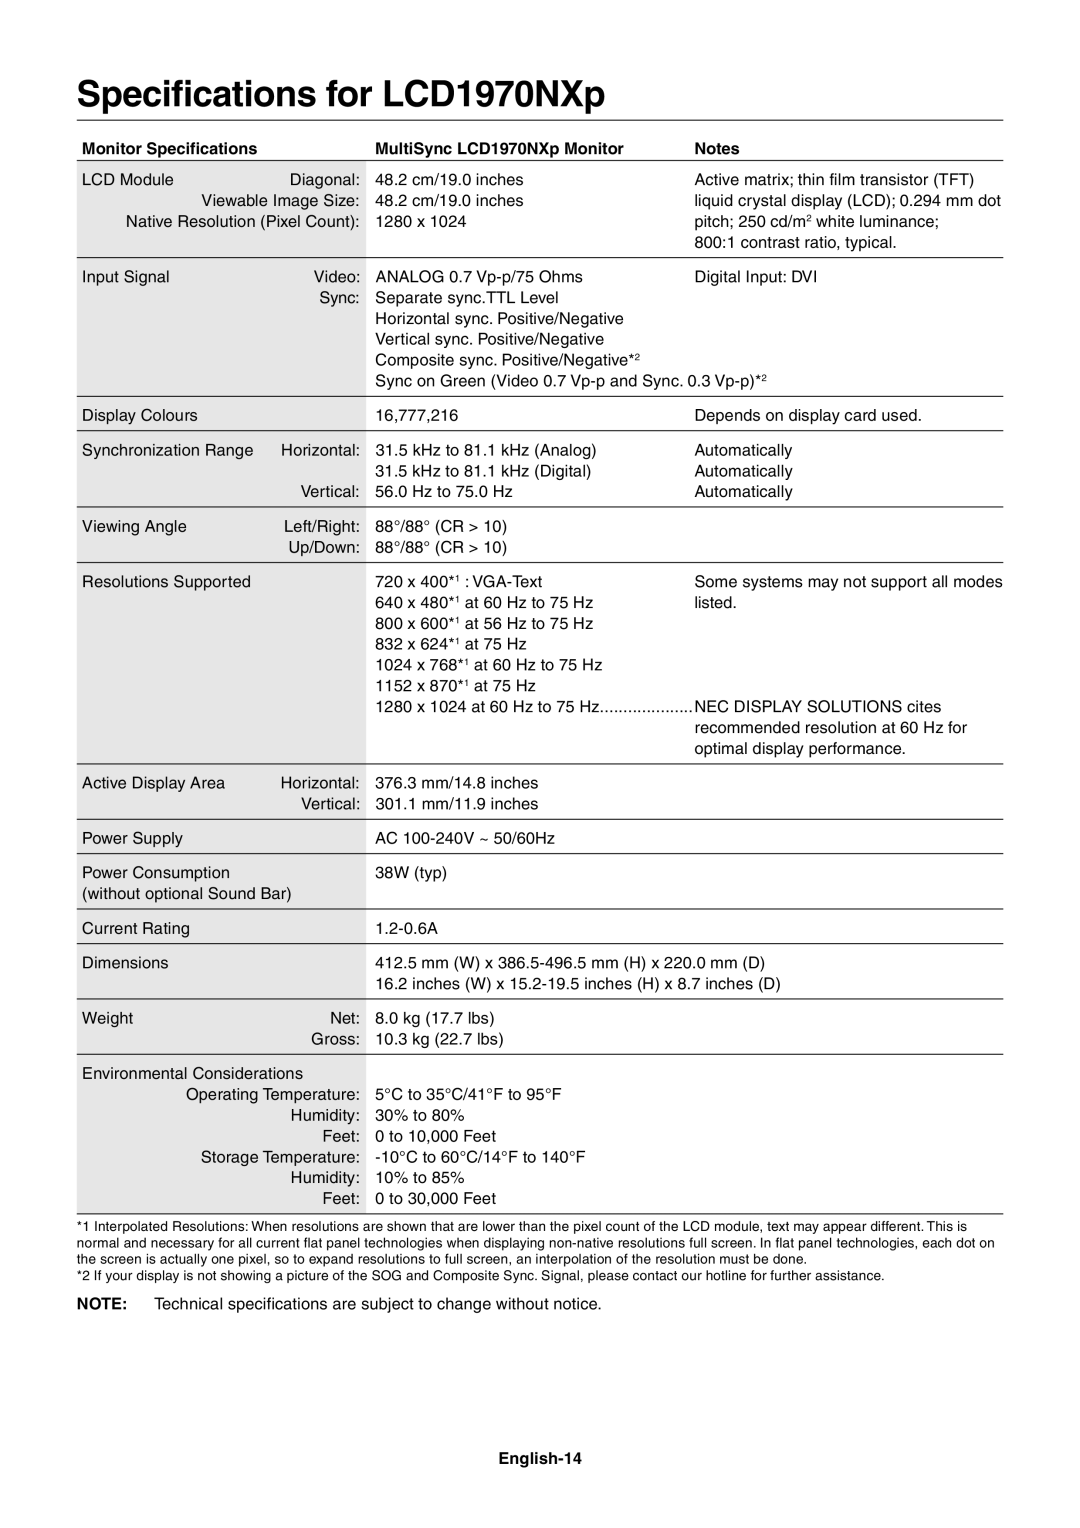 NEC LCD1970VX user manual Specifications for LCD1970NXp, Monitor Specifications, MultiSync LCD1970NXp Monitor, English-14 